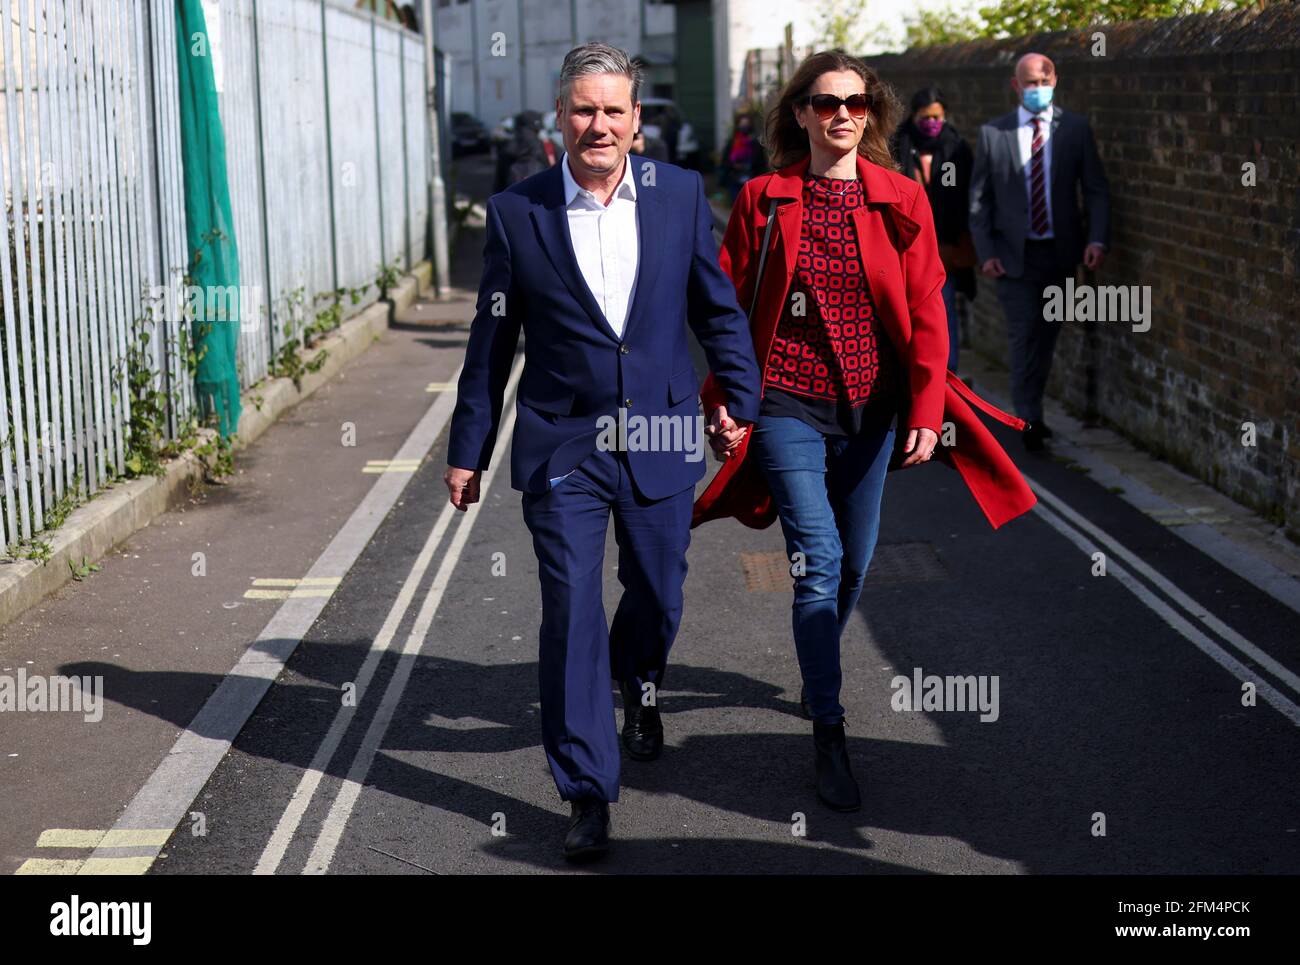 Britain's Labour Party leader Keir Starmer and his wife Victoria walk after casting a vote during local elections, in London, Britain May 6, 2021. REUTERS/Tom Nicholson Stock Photo